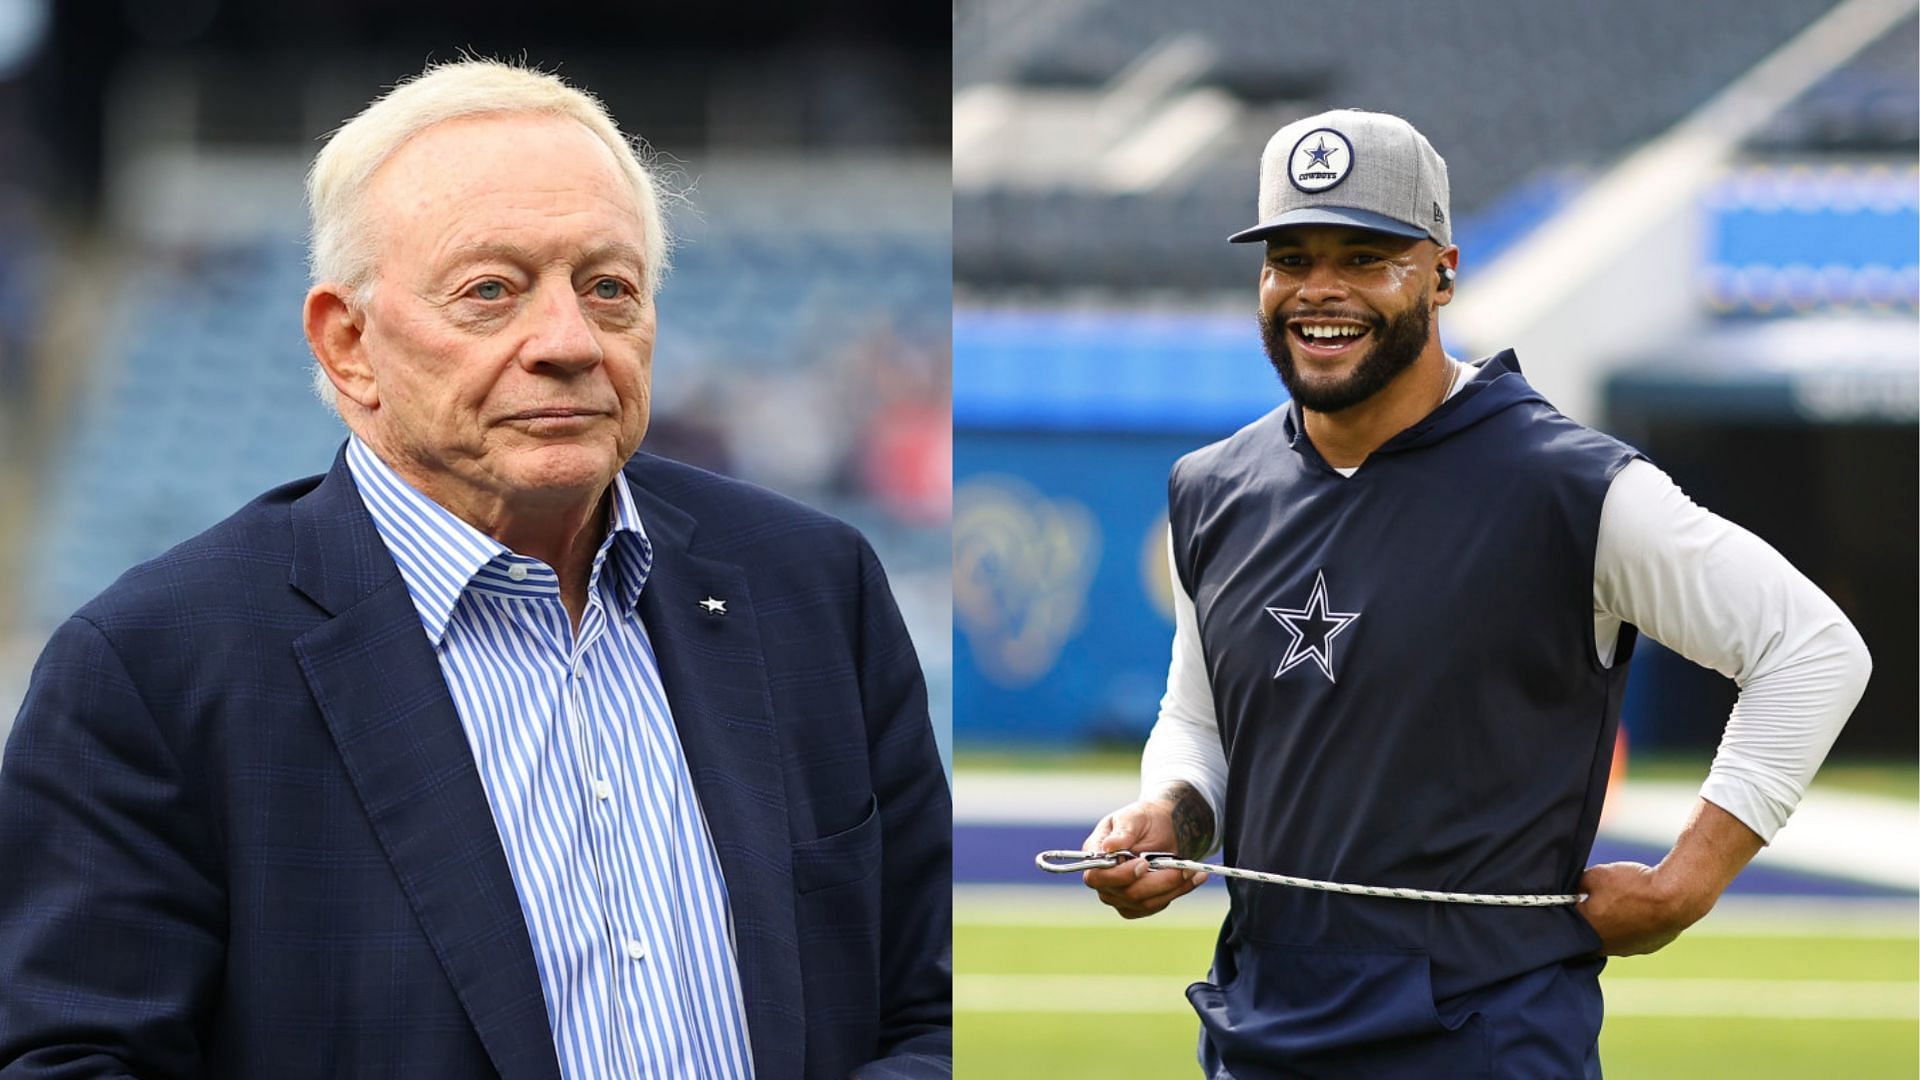  Jerry Jones (left) gives clarity on $160,000,000 star